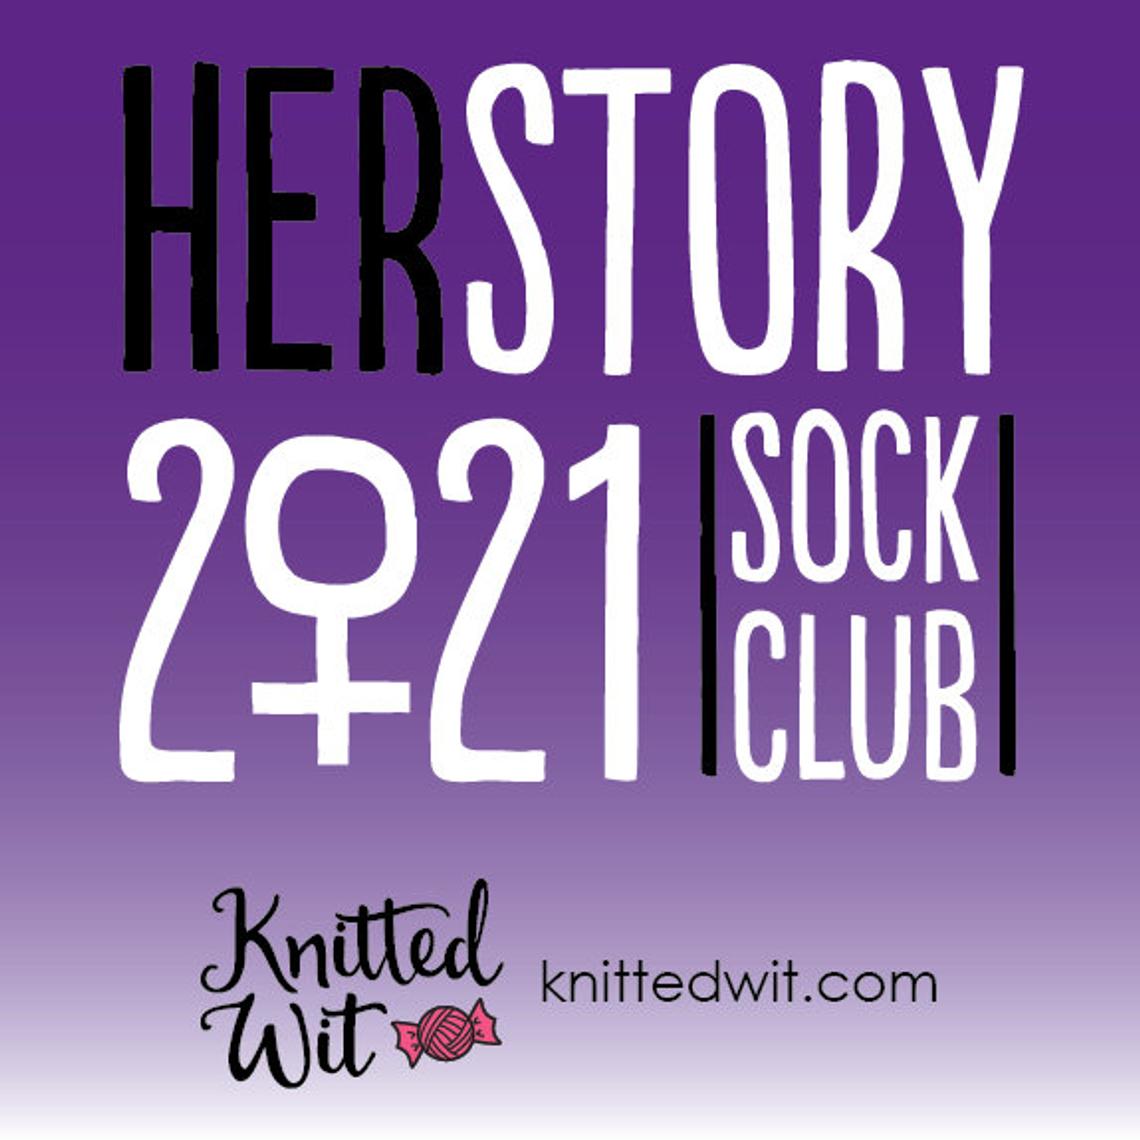 Knitted Wit HerStory 2021